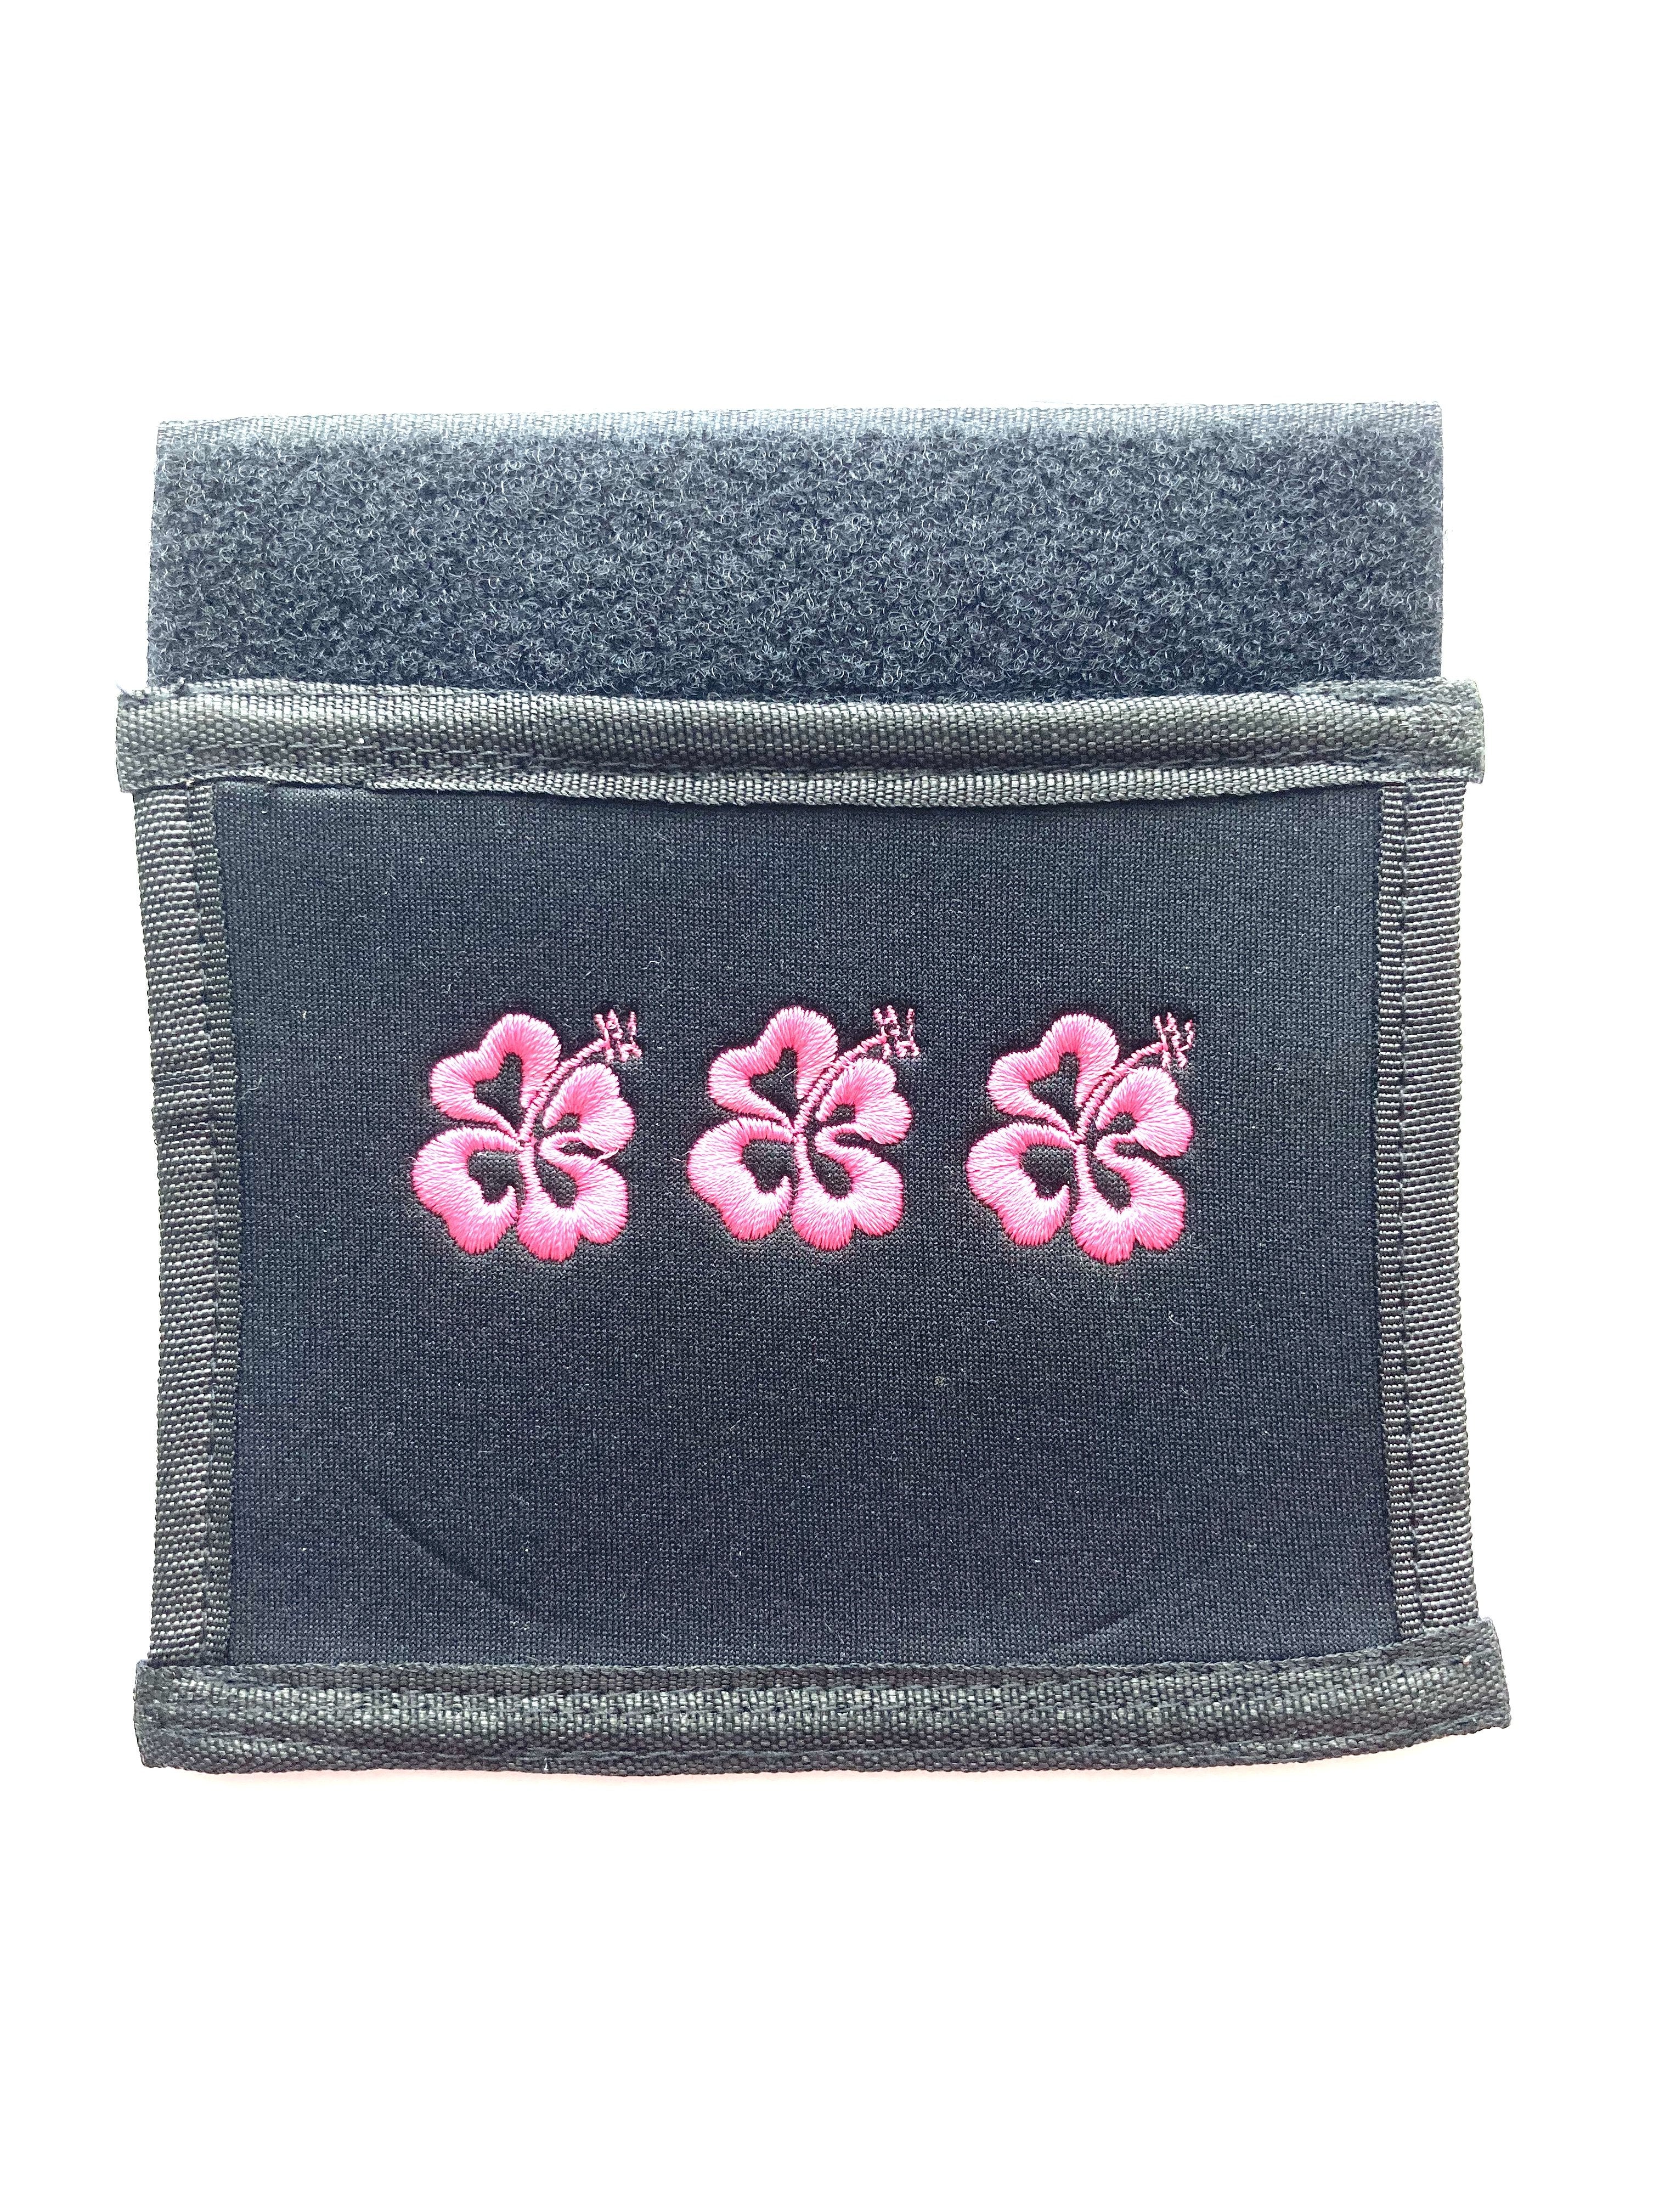 Hawaian flowers - Crew Luggage Handle Cover (Pink)